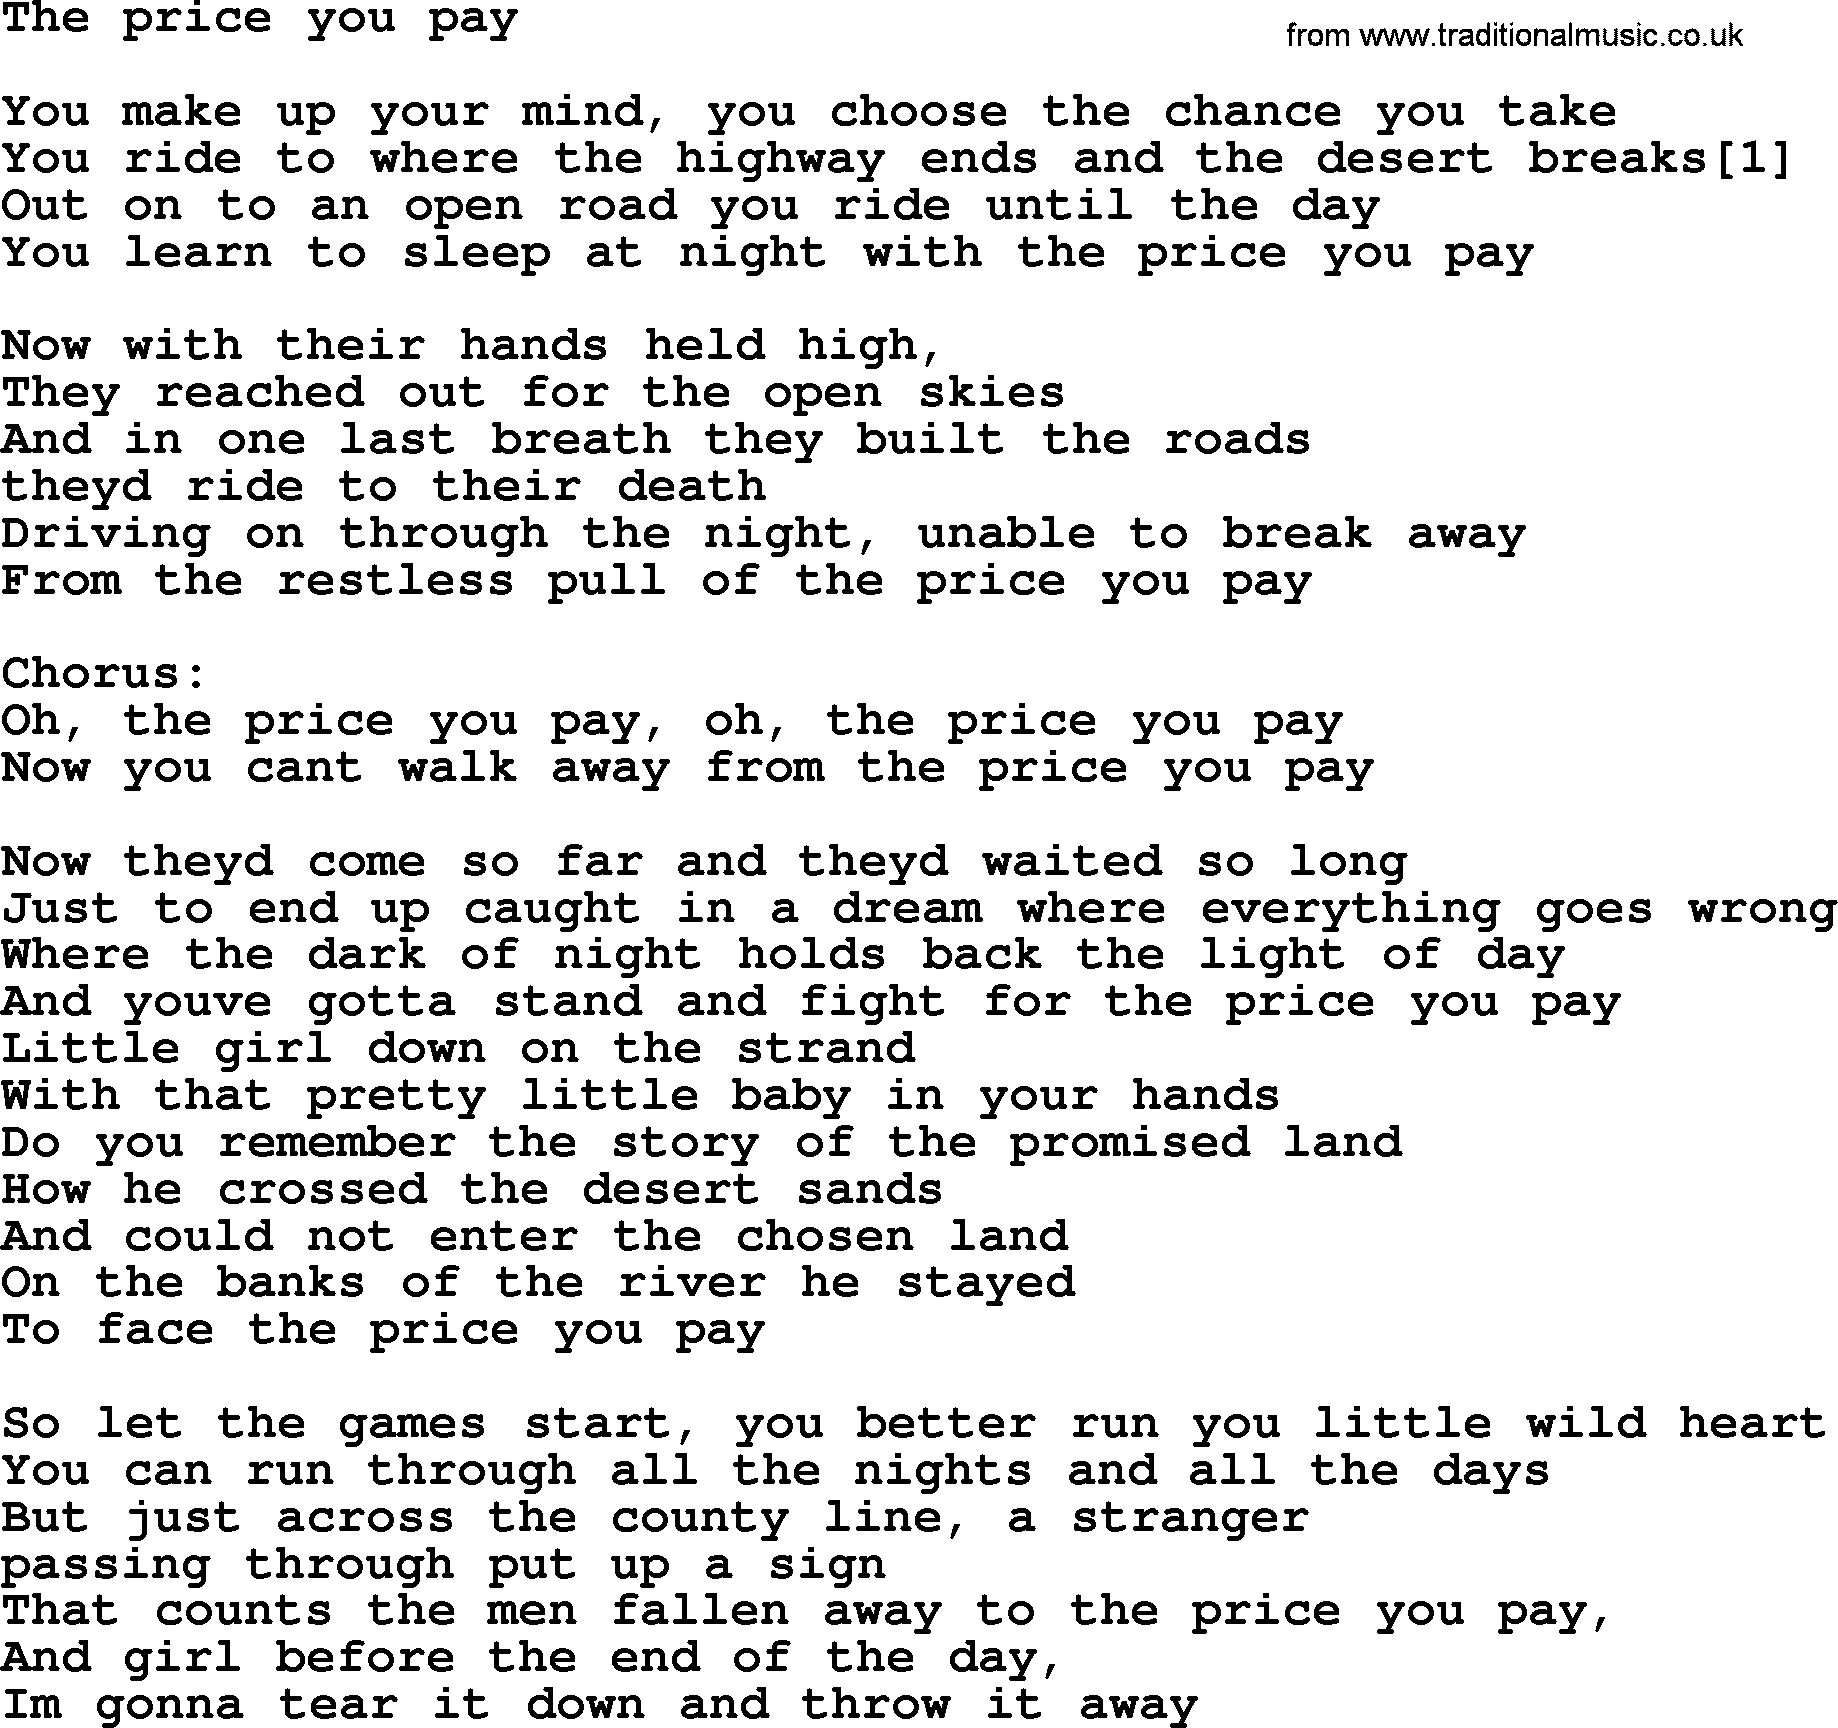 Bruce Springsteen song: The Price You Pay lyrics